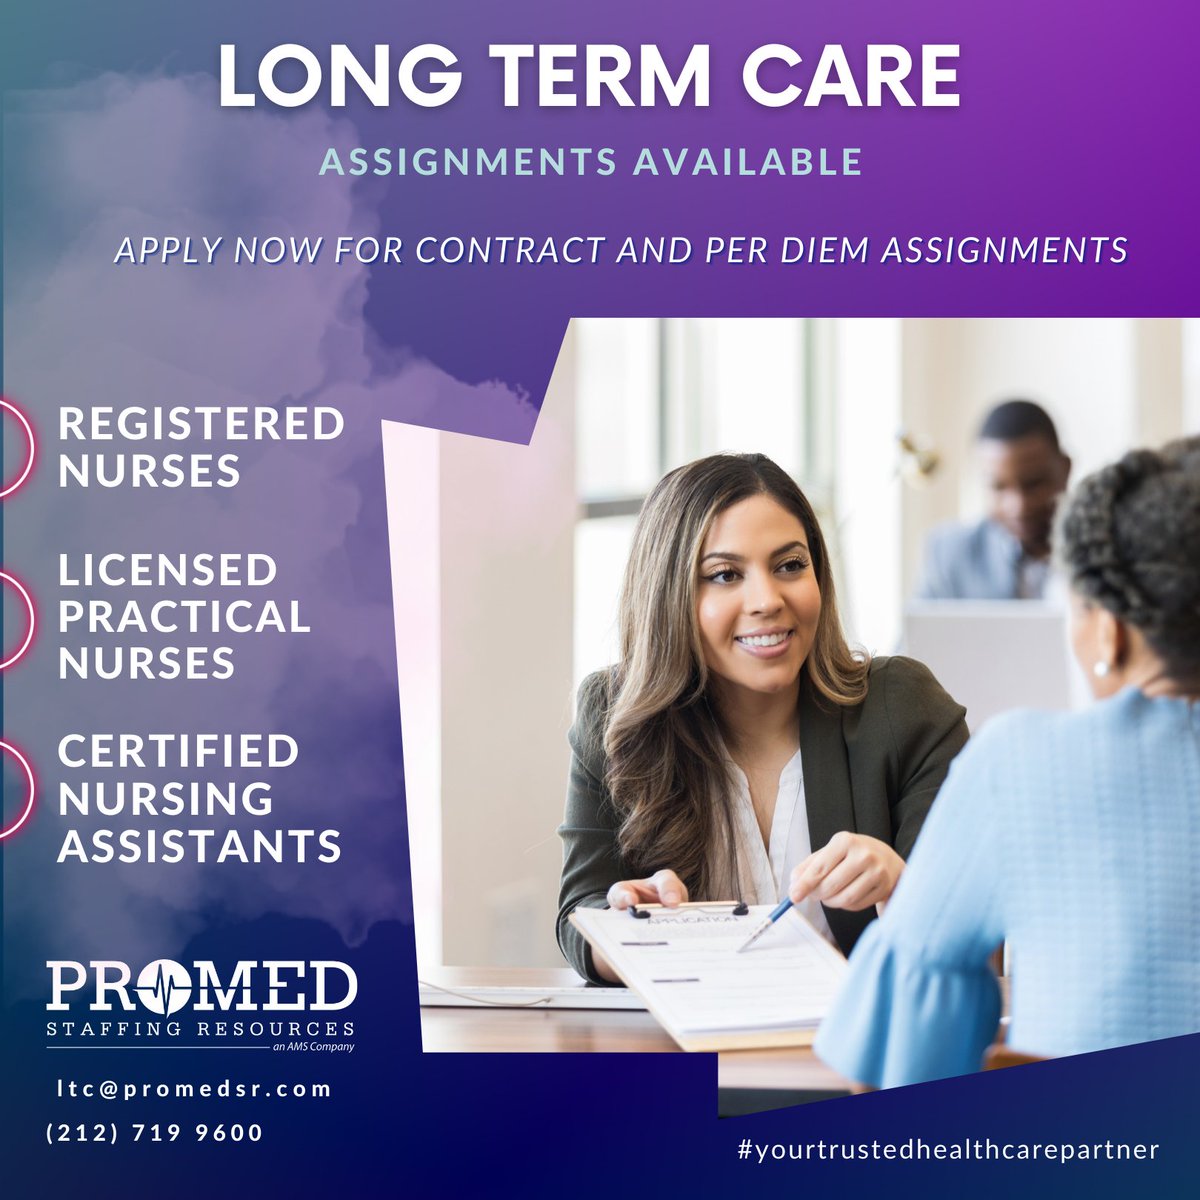 ProMed Staffing Resources has the perfect #opportunity for you! Join our #talented and #compassionateteam and provide quality care - apply today via email at ltc@promedsr.com

#longtermcare #longtermcarefacilities #longtermcarerecruiting #nyc #nycjobs #assistedliving #promedsr